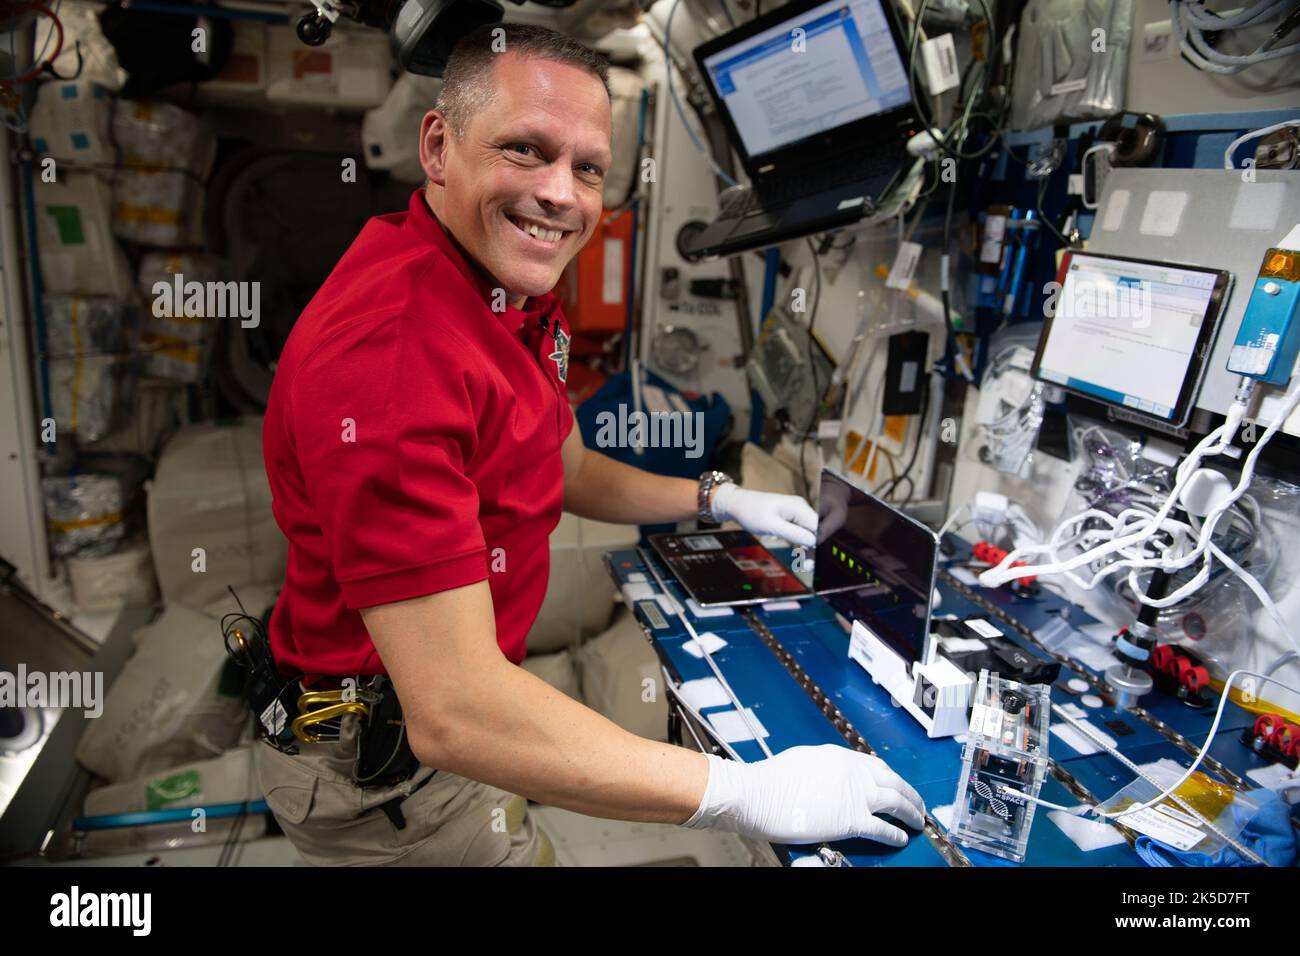 NASA astronaut Bob Hines is shown performing Genes in Space-9 aboard the International Space Station (ISS). Cell-free technology is a platform for protein production that does not include living cells. GIS-9 evaluates two approaches for using this technology in microgravity: cell-free protein production and biosensors that can detect specific target molecules. The technology could provide a portable, low-resource, and low-cost tool with potential applications for medical diagnostics, on-demand production of medicine and vaccines, and environmental monitoring on future space missions. Stock Photo